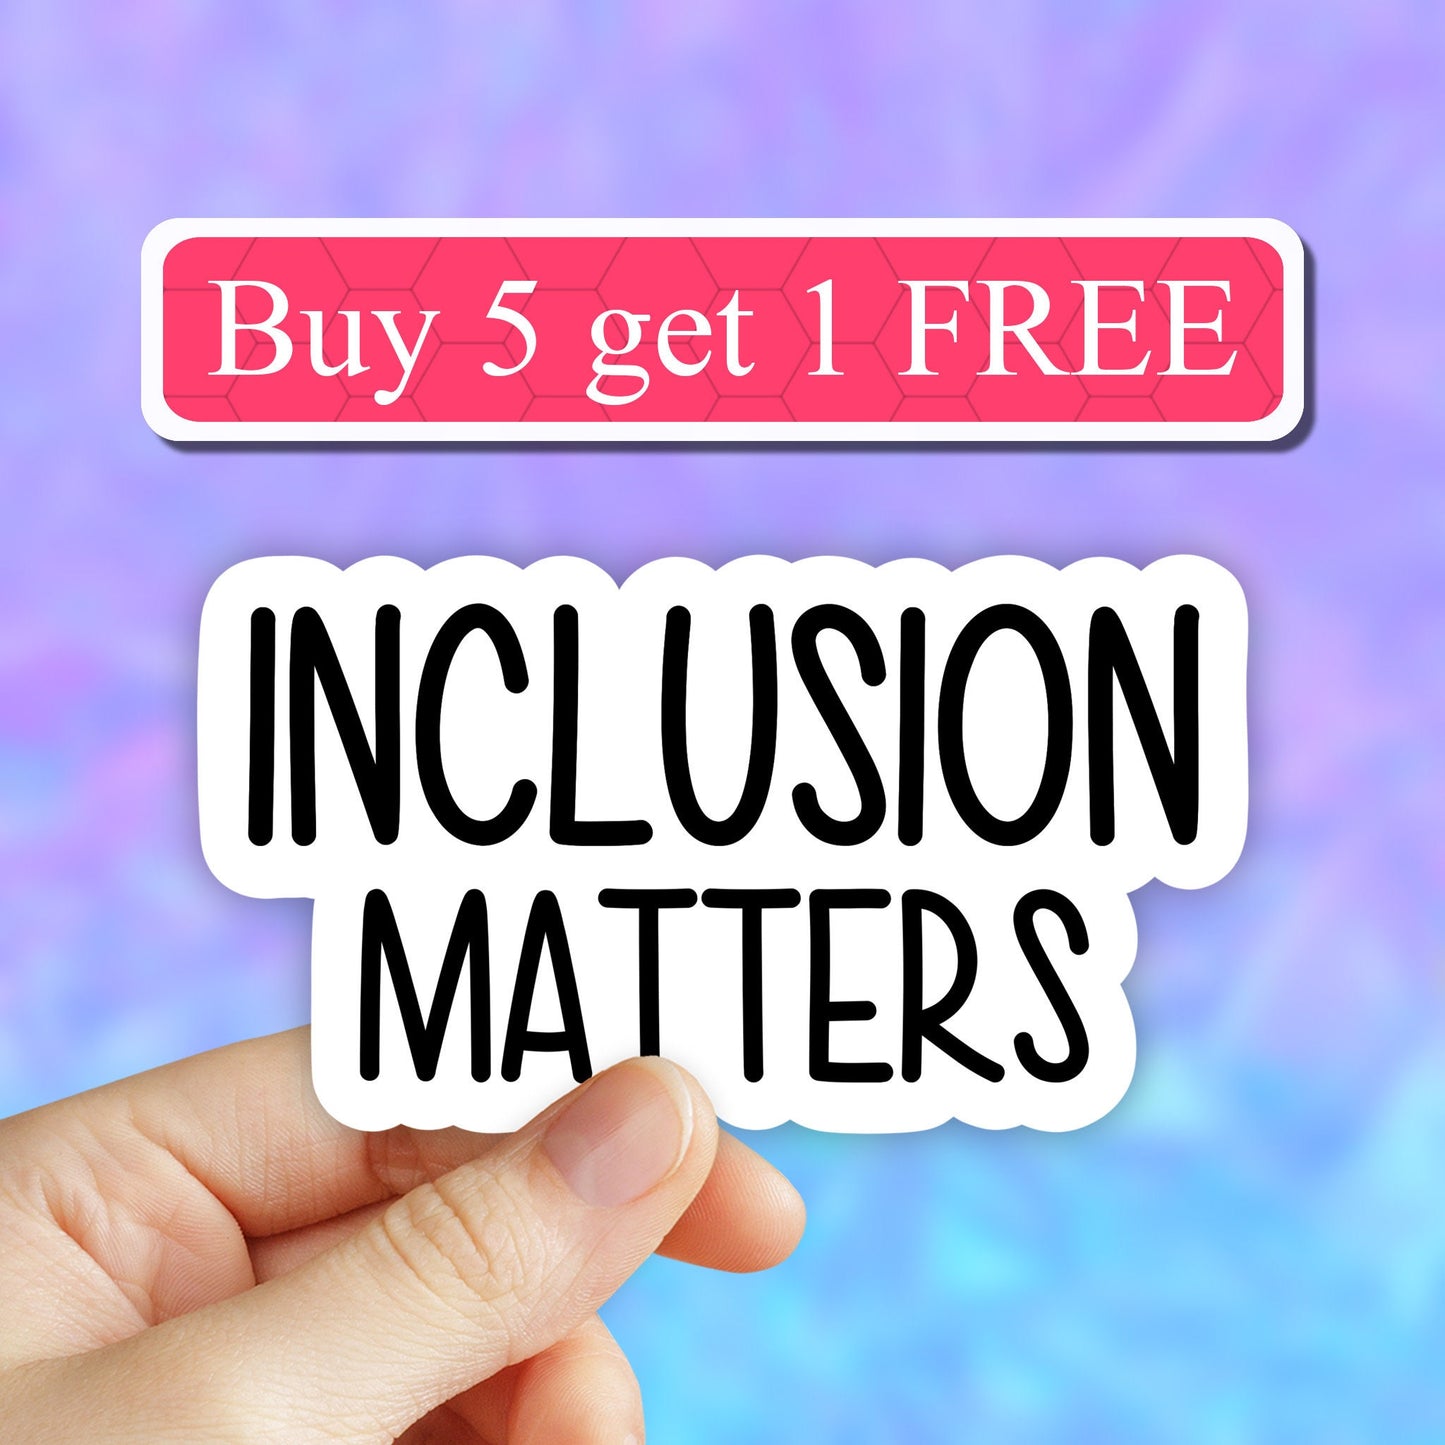 Inclusion matters sticker, inclusion laptop decals, tumbler stickers, inclusion public water bottle sticker, water bottle decal, computer